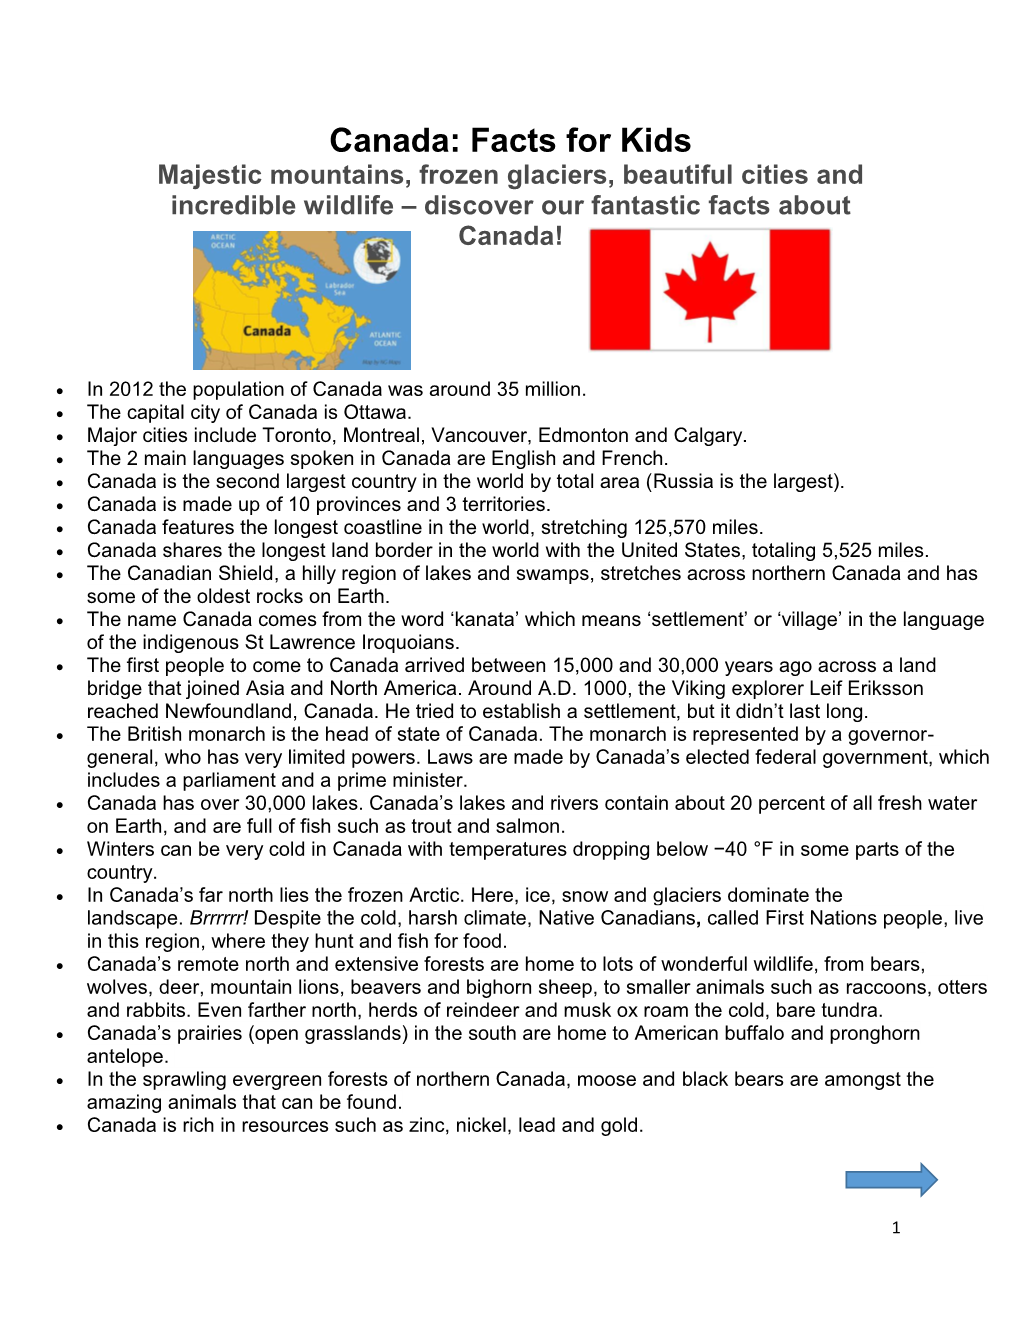 Canada: Facts for Kids Majestic Mountains, Frozen Glaciers, Beautiful Cities and Incredible Wildlife – Discover Our Fantastic Facts About Canada!